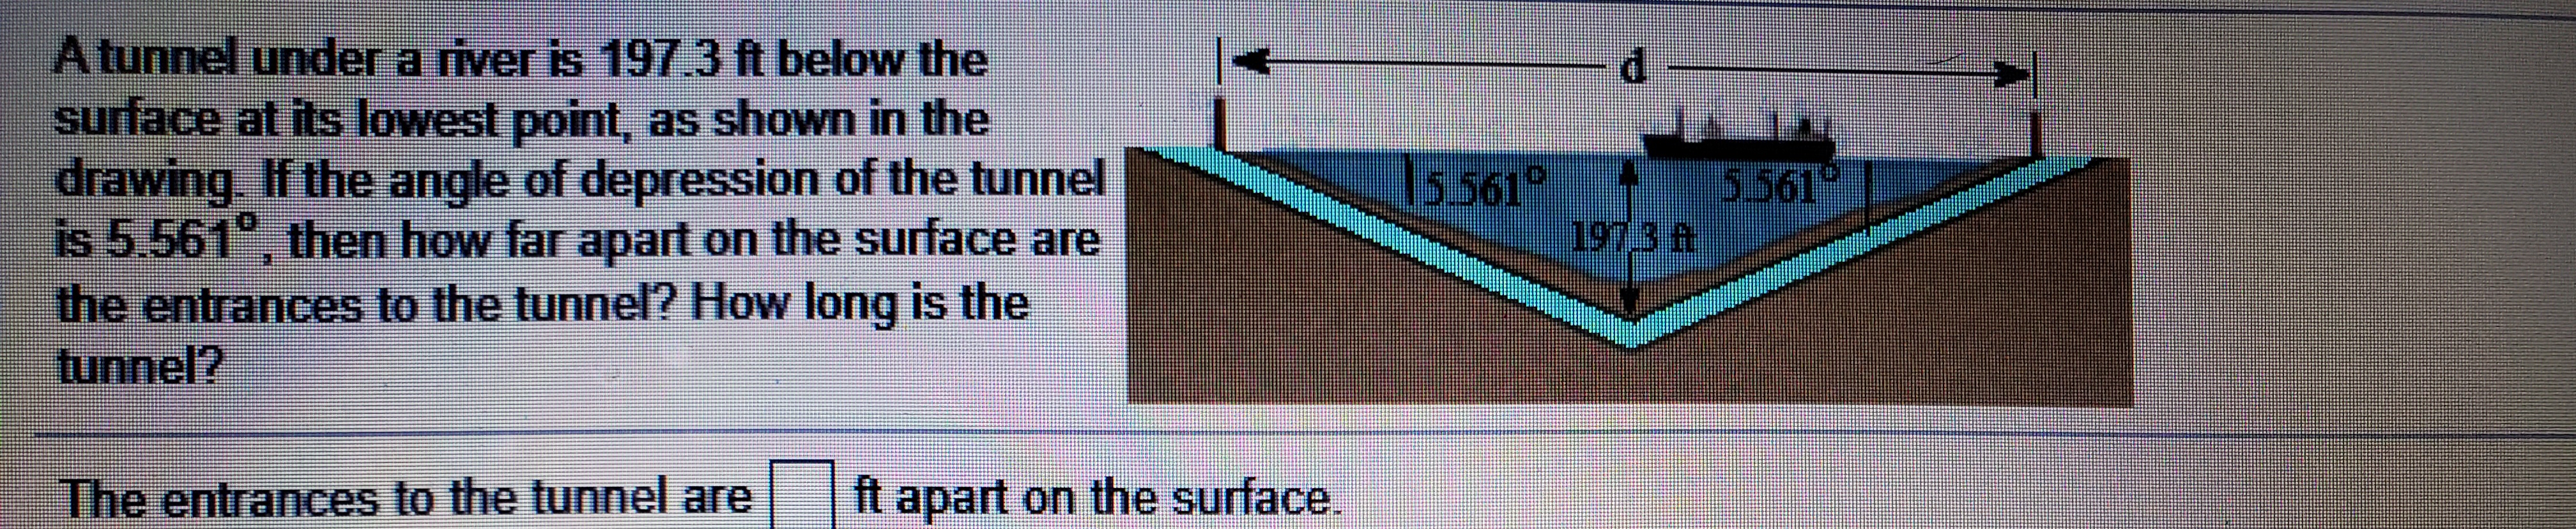 Atunnel under a river is 197.3 ft below the
surface at its lowest point, as shown in the
drawing. If the angle of depression of the tunnel
is 5.561°, then how far apart on the surface are
the entrances to the tunnel? How long is the
tunnel?
